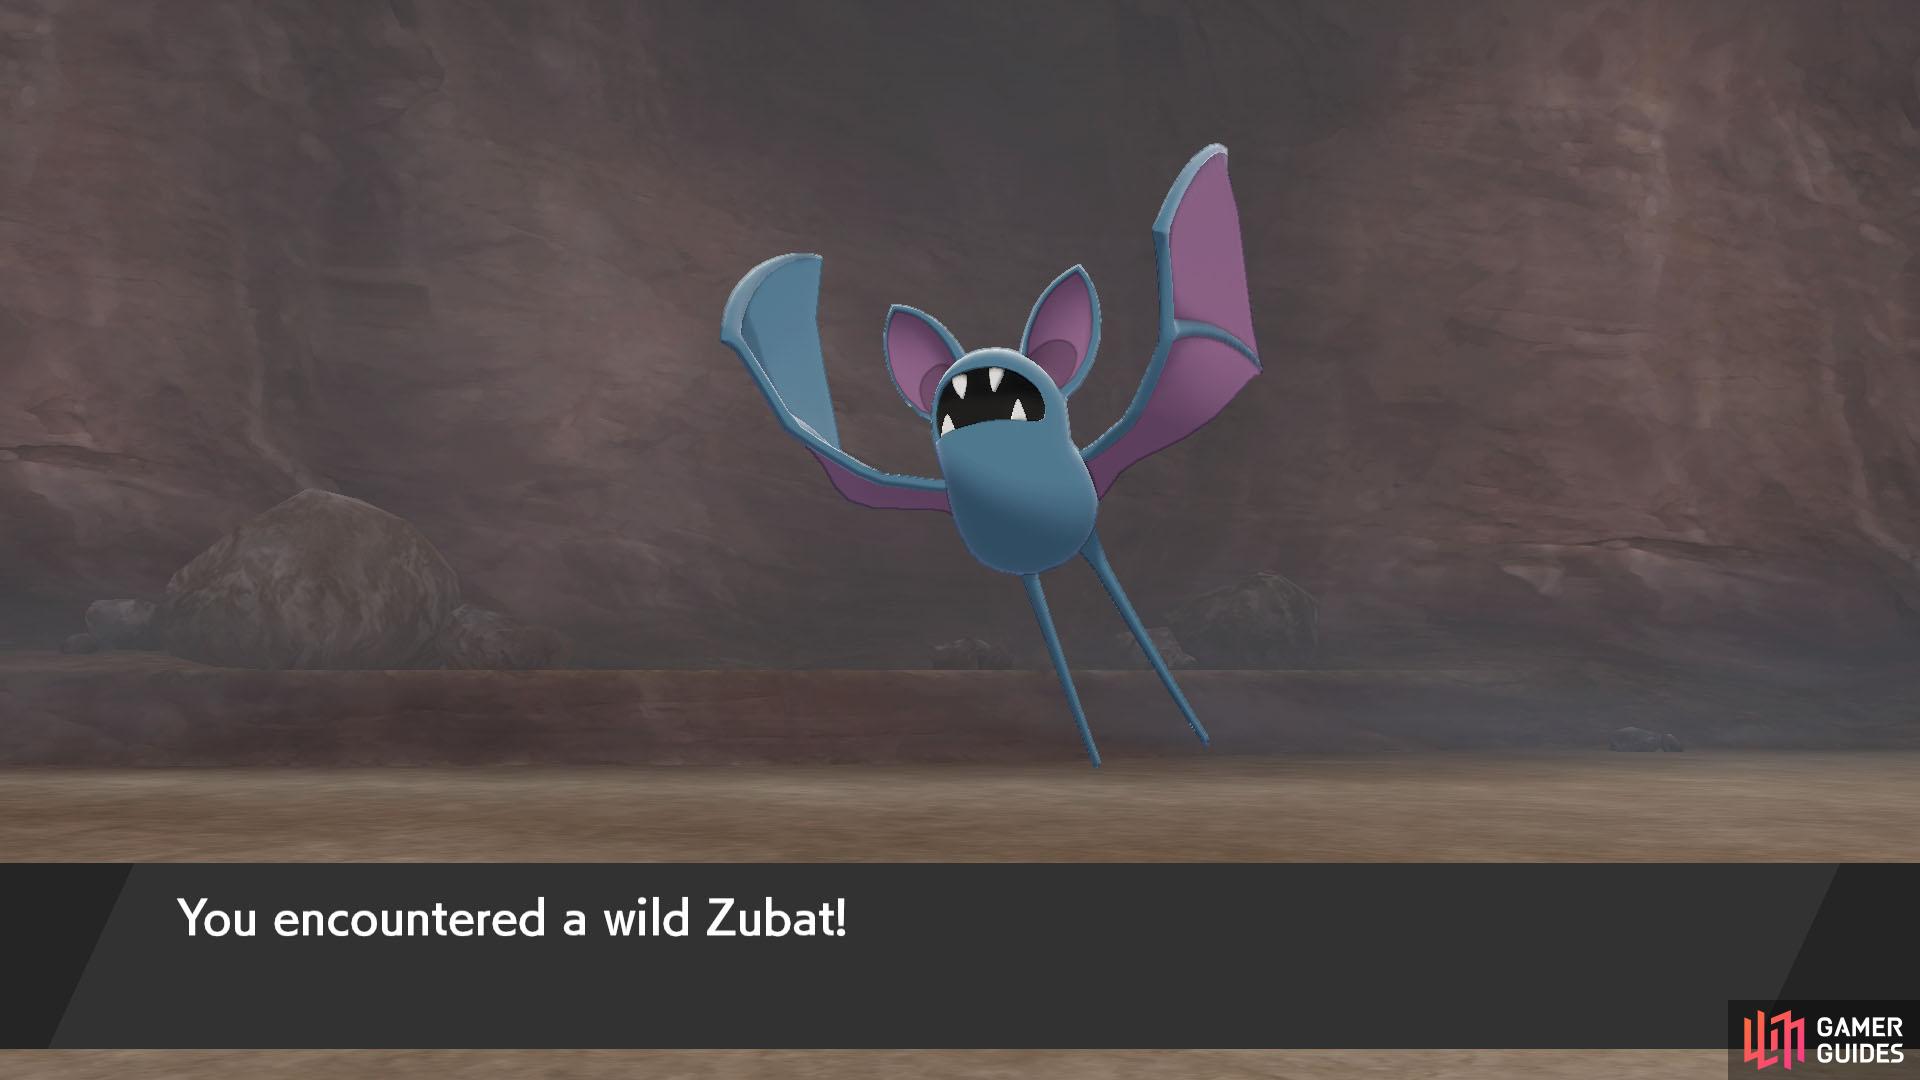 Is there anyone who missed bumping into Zubat in caves?